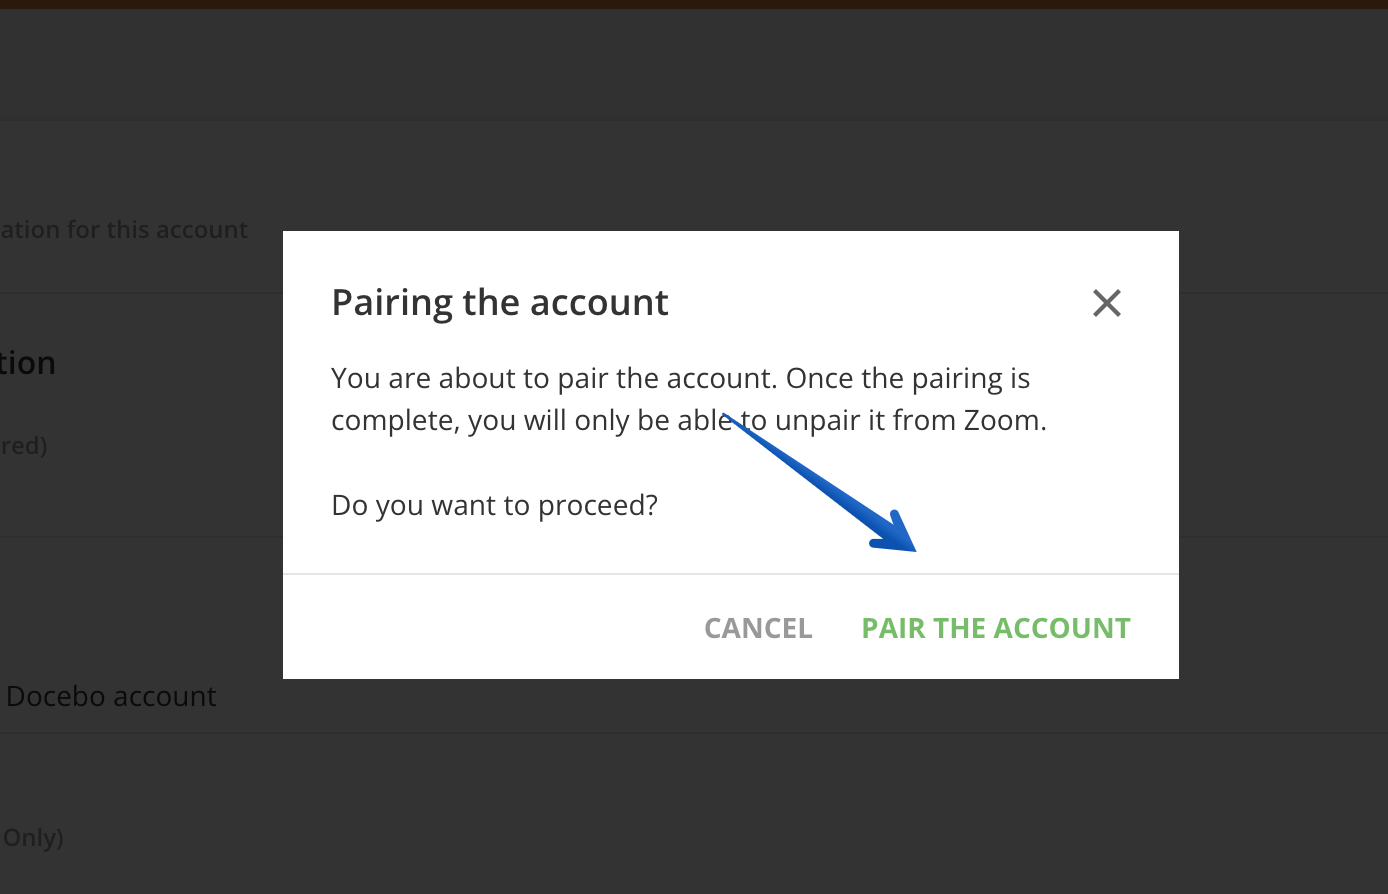 Pressing the Pair the Account button to confirm the pairing